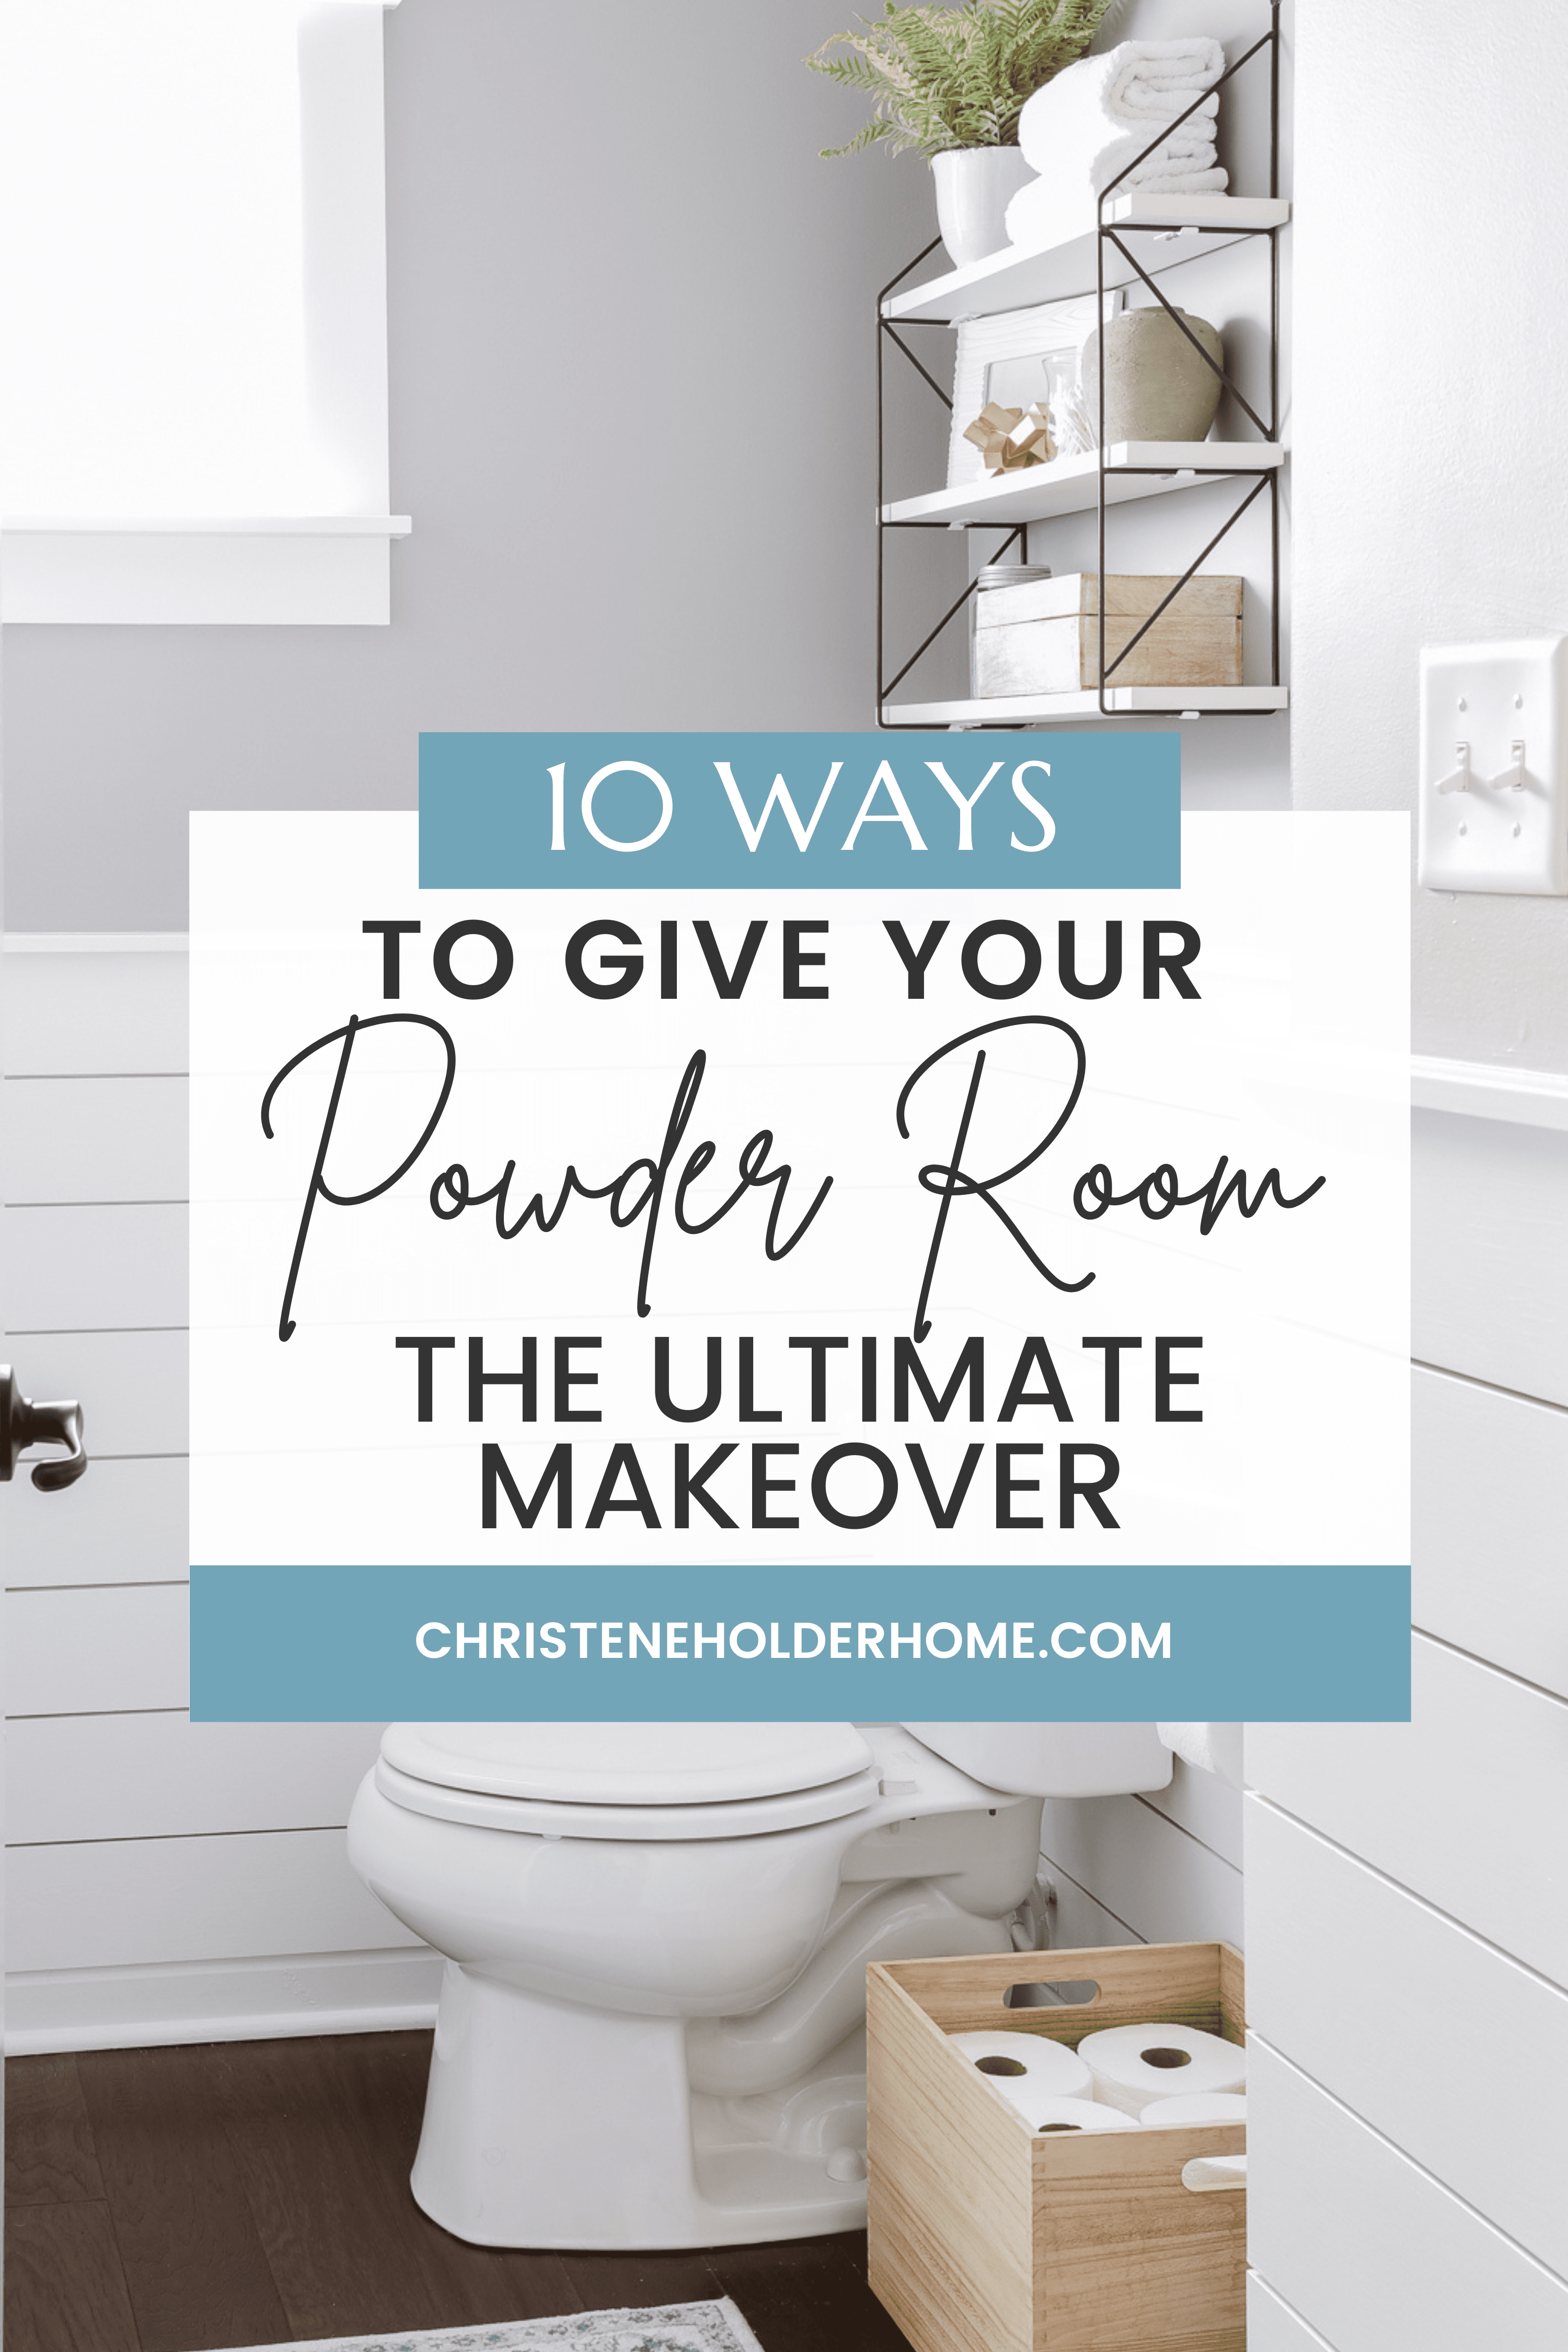 10 ways to give your powder room the ultimate makeover